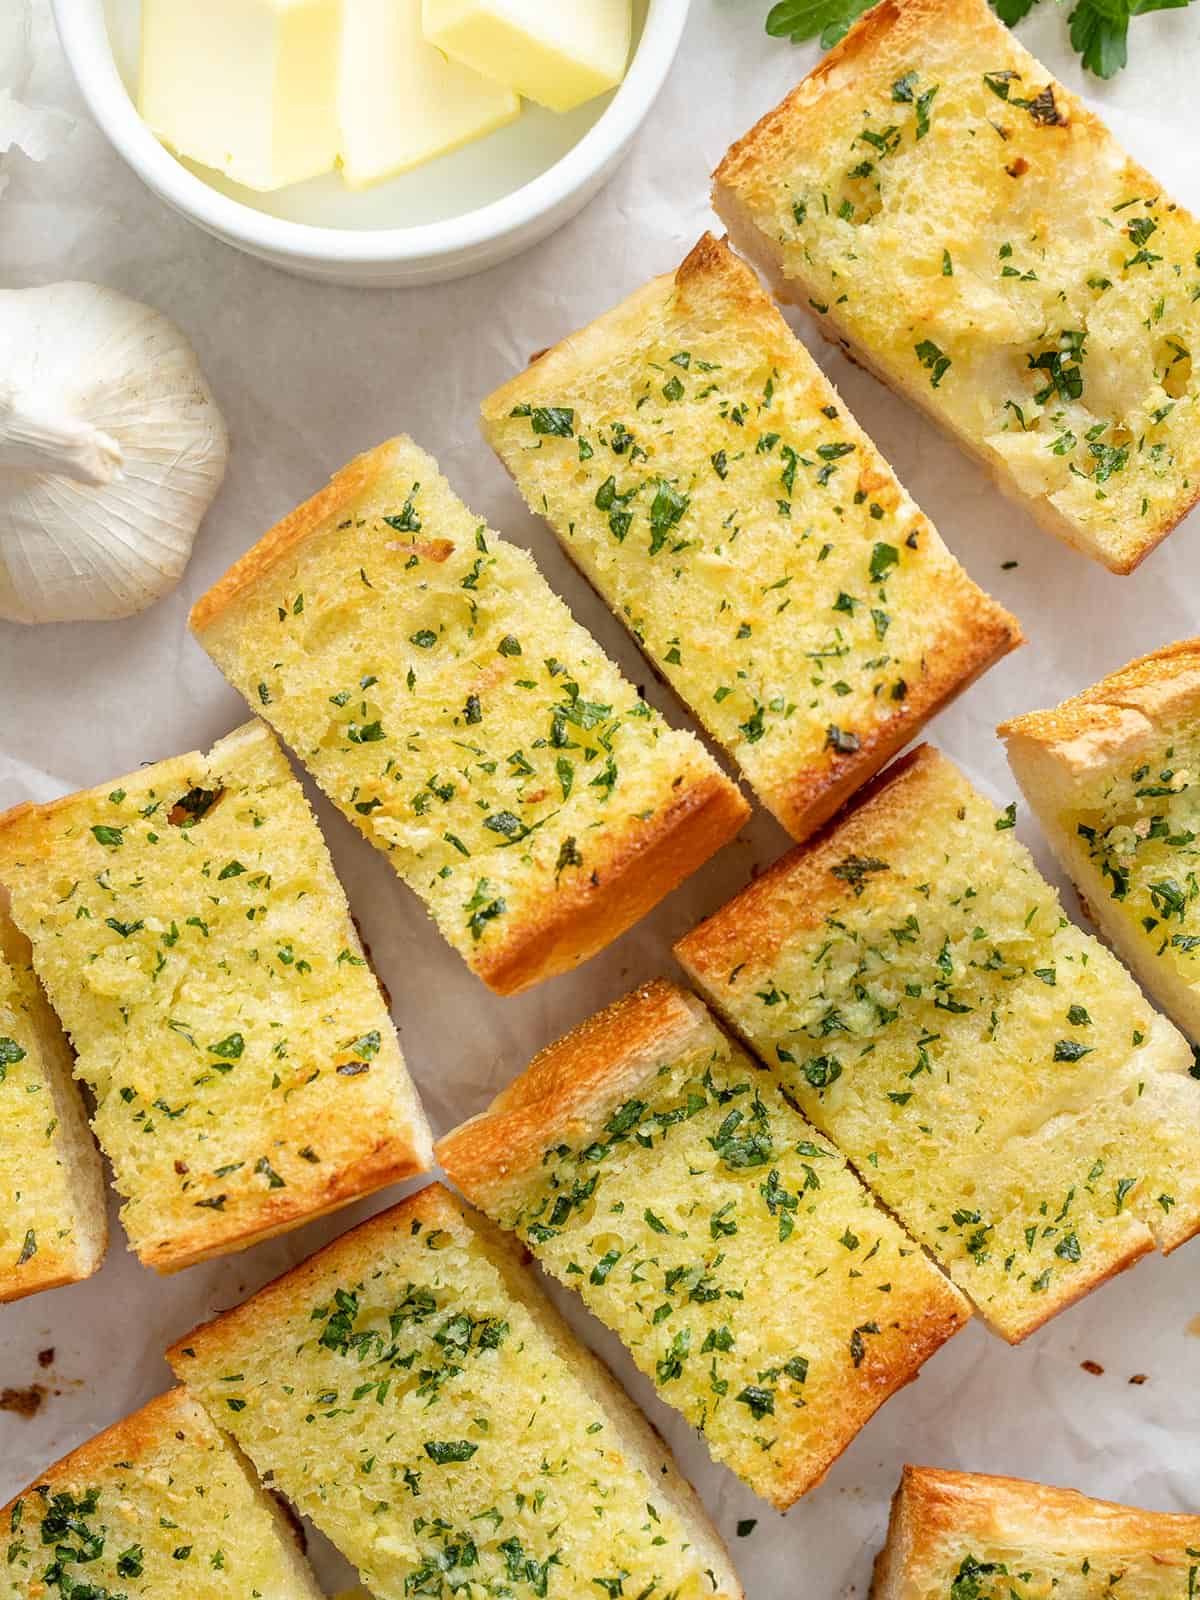 Slices of homemade garlic bread on a surface next to a bowl of butter.